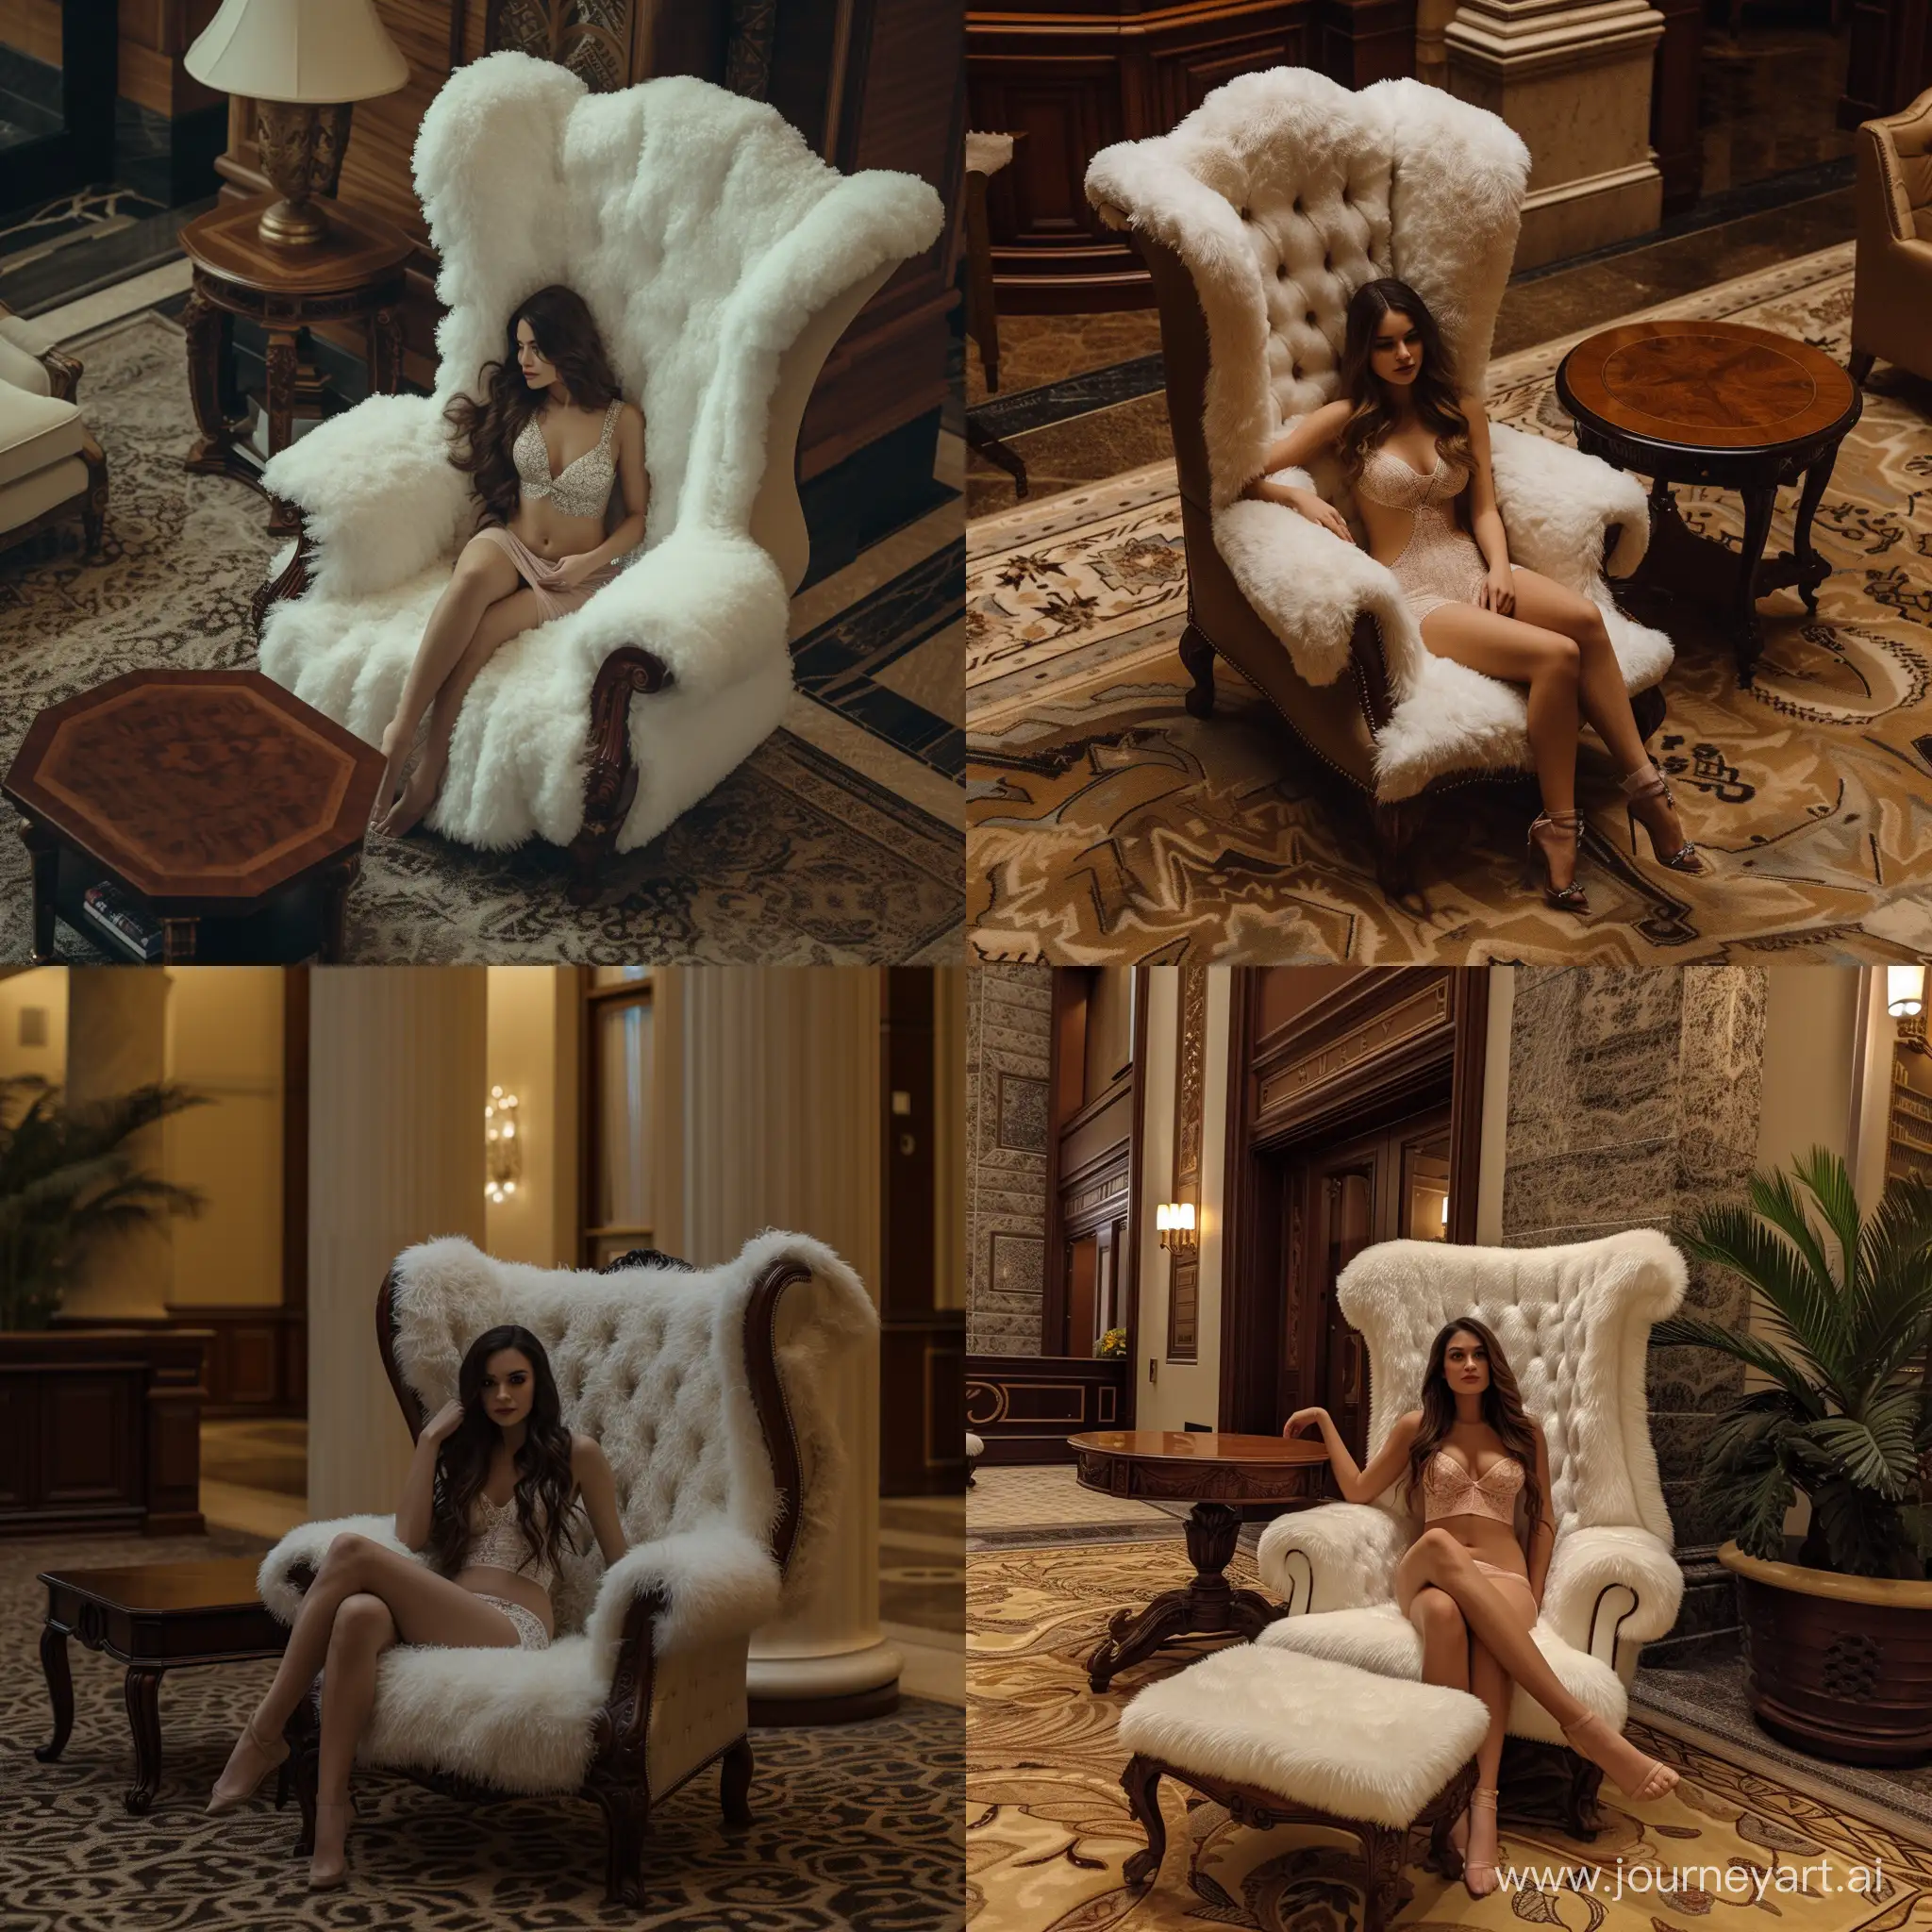 brunette lingerie model that dose not exist in real life, relaxing in a tall back neo-cosmic chesterfield arm chair made with thick white fur, a mahogany coffee table next to it, a thick carpet under it, hotel lobby, focus on a air of comfort, loneliness and luxury